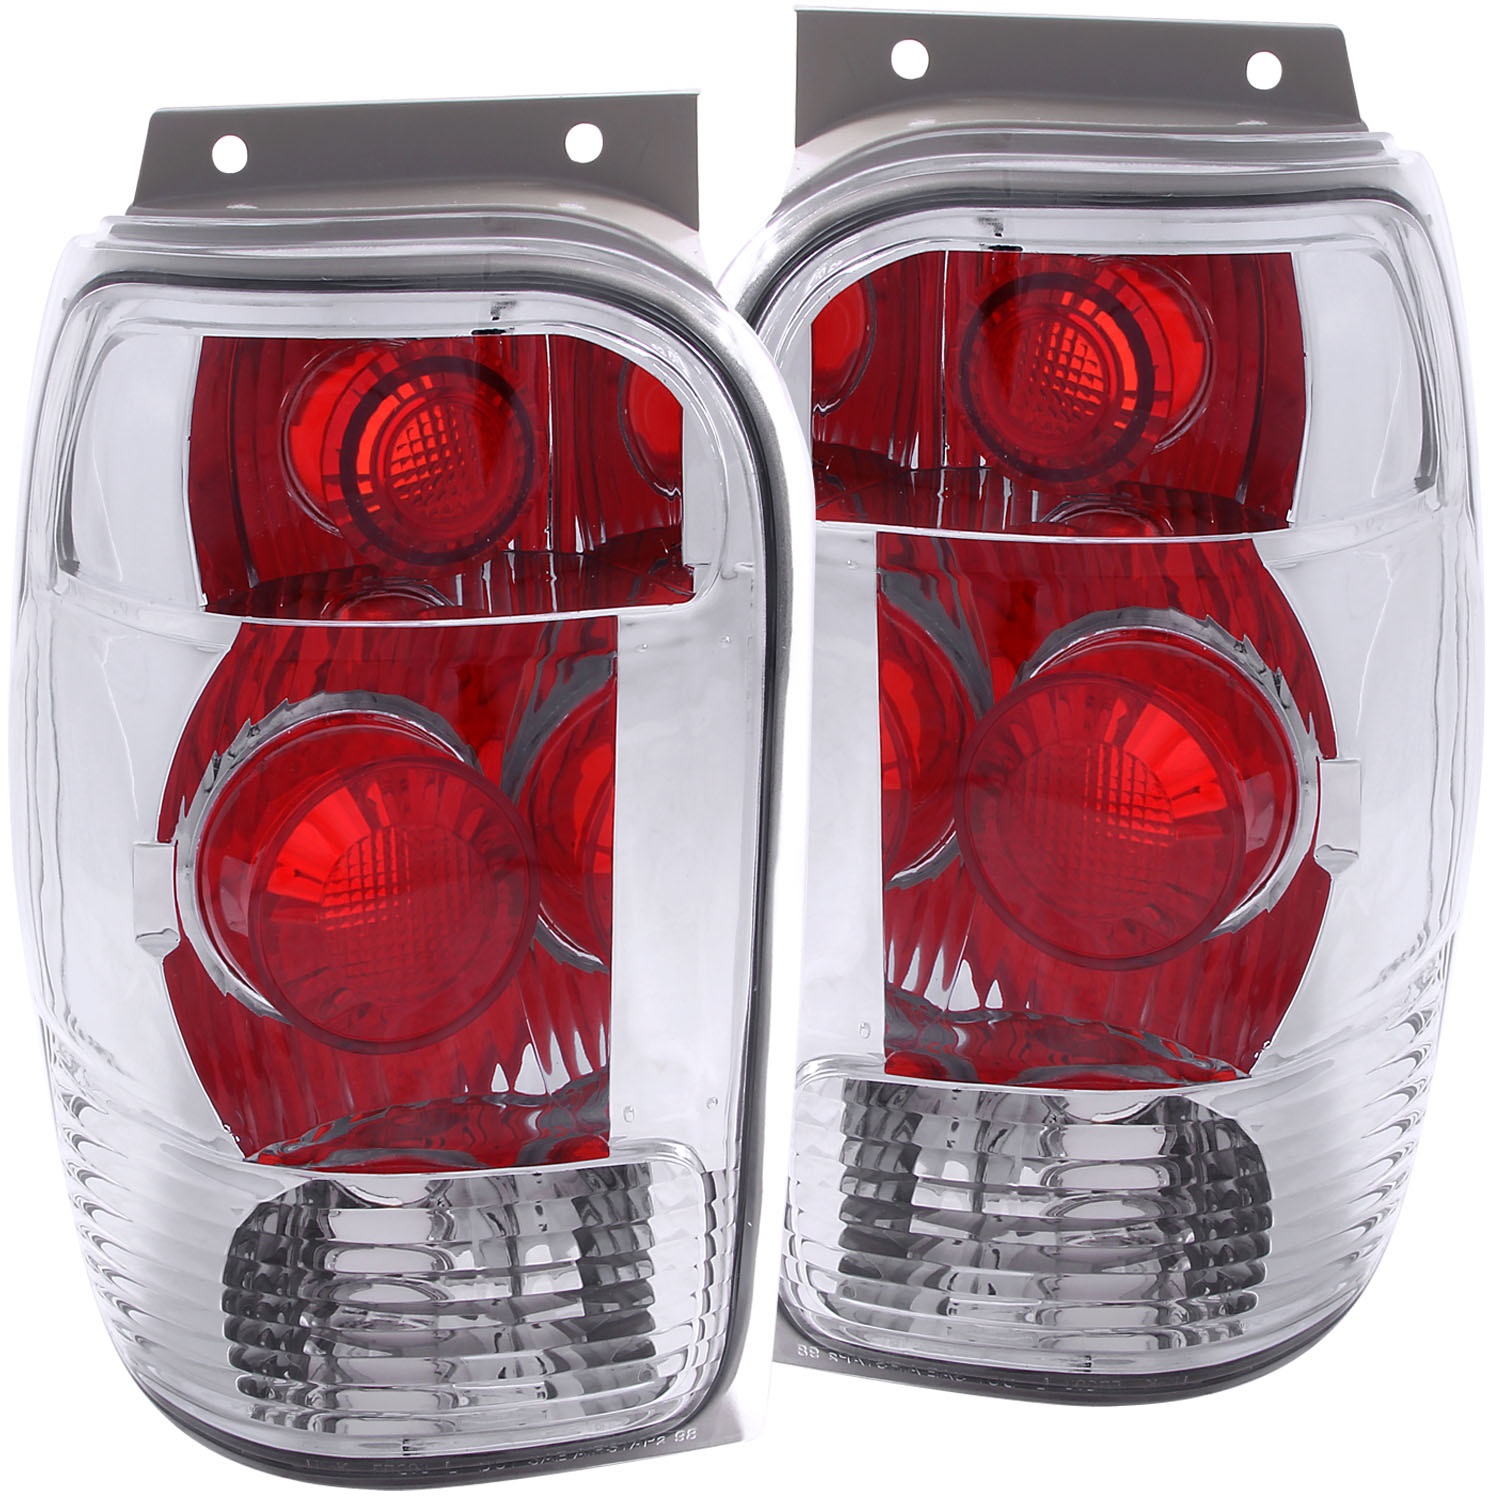 Anzo USA Anzo USA 211082 Tail Light Assembly Fits 98-01 Explorer Mountaineer